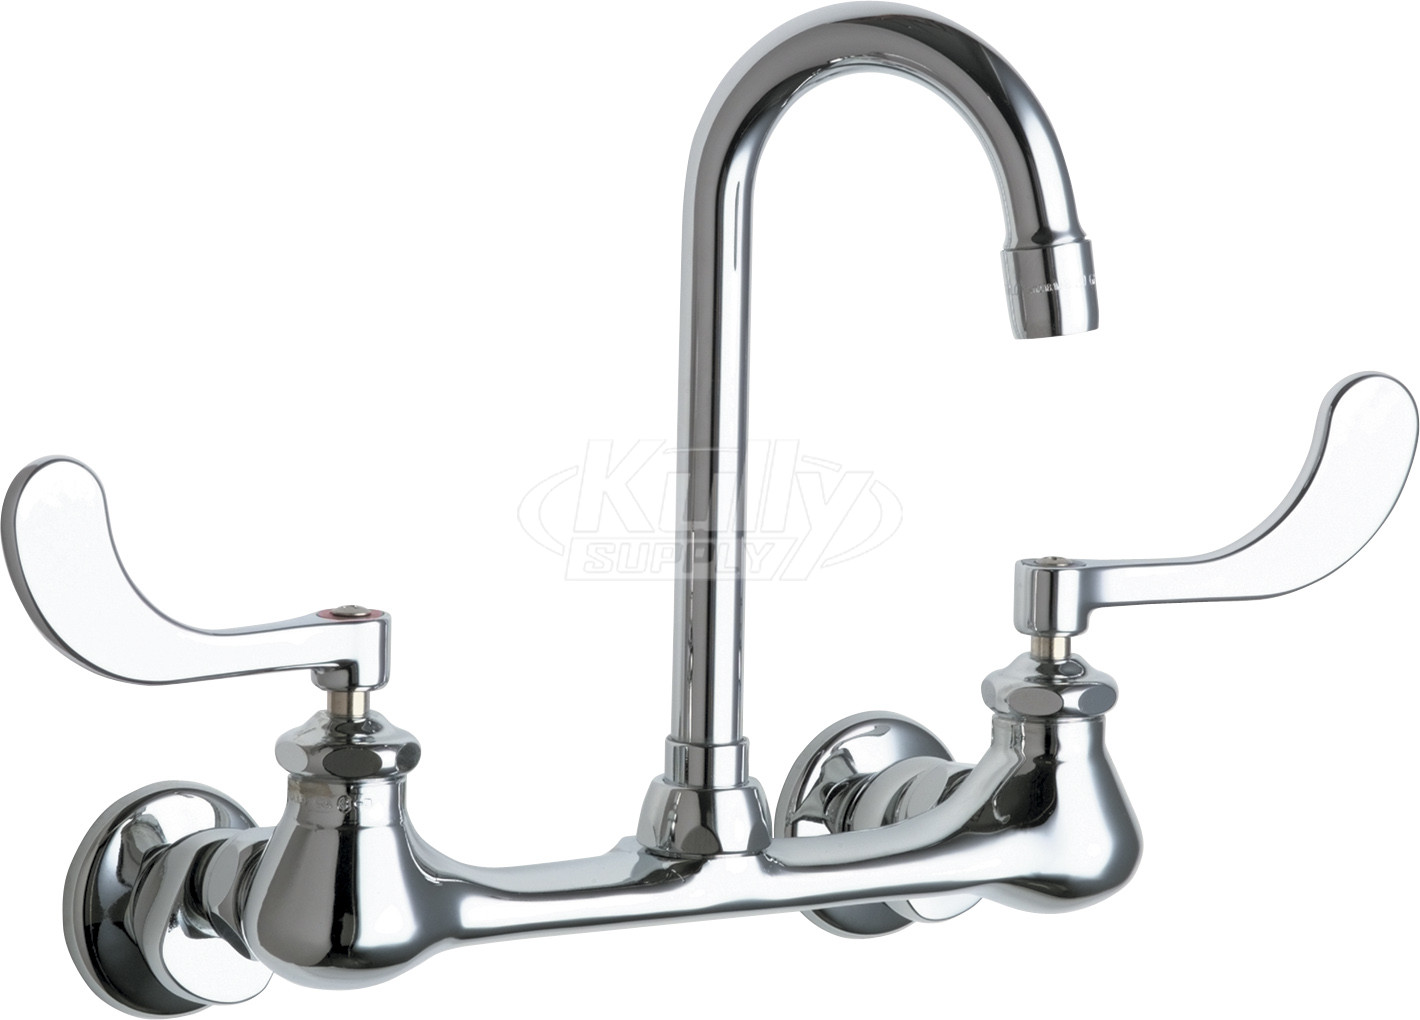 Chicago 631-ABCP Hot and Cold Water Sink Faucet